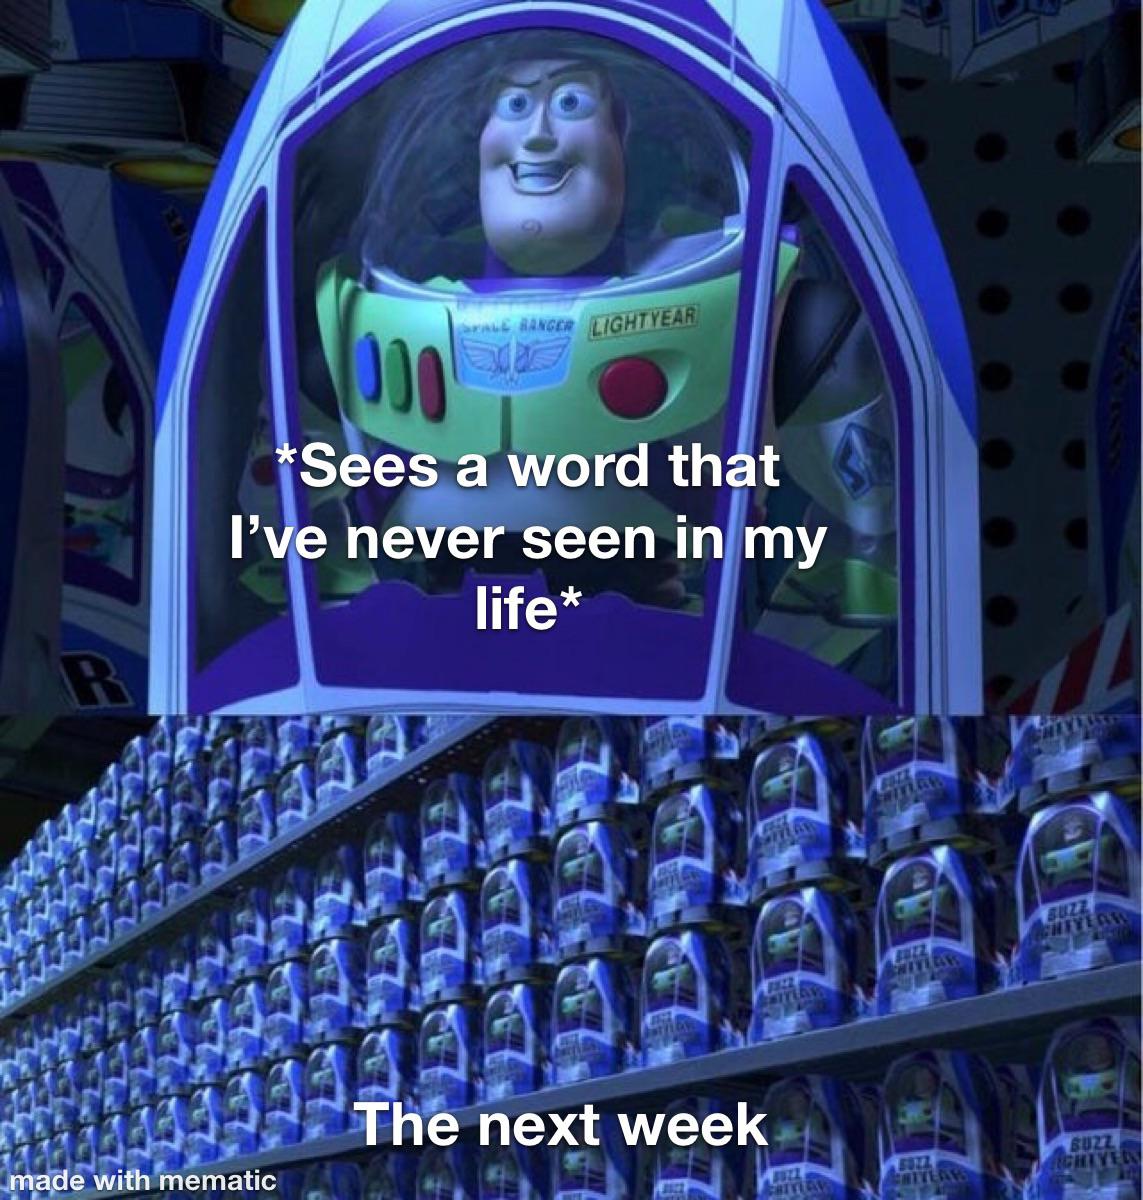 buzz lightyear meme - Se Banger Lightyear 000 Sees a word that I've never seen in my life R Enry Star Buzz Wtyle Utz Niter 22 Slav The next week Buzz Cheyen Bozz made with mematic Sie